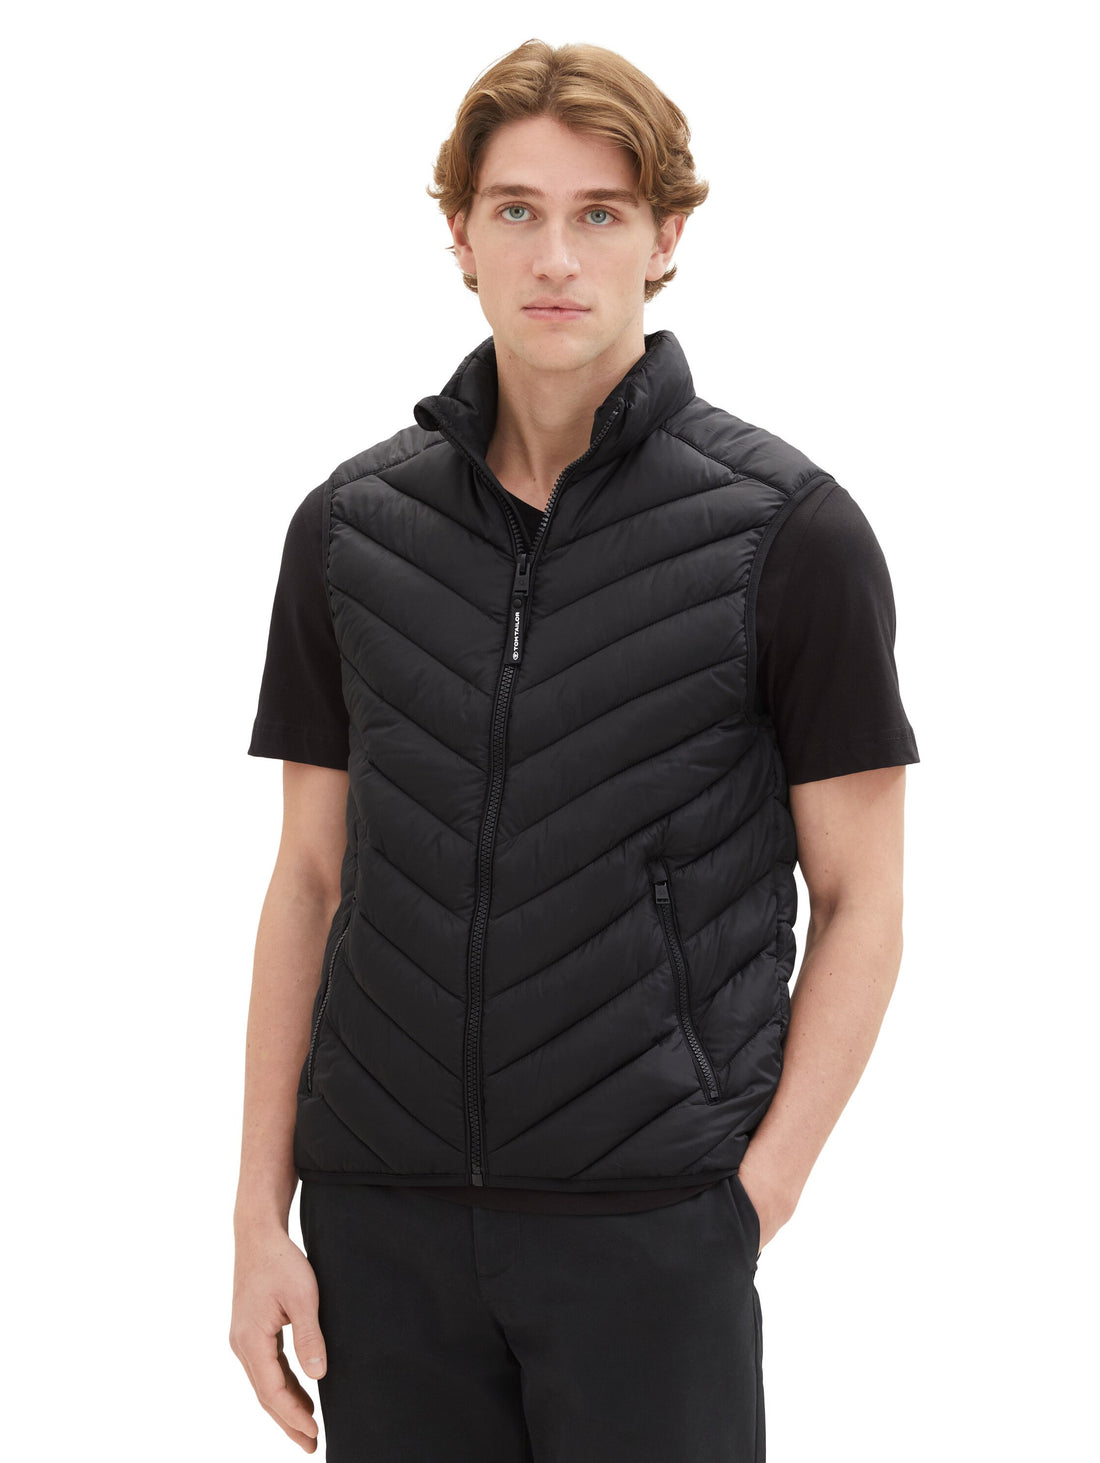 Quilted Puffer Light Weight Vest_1036072_29999_02